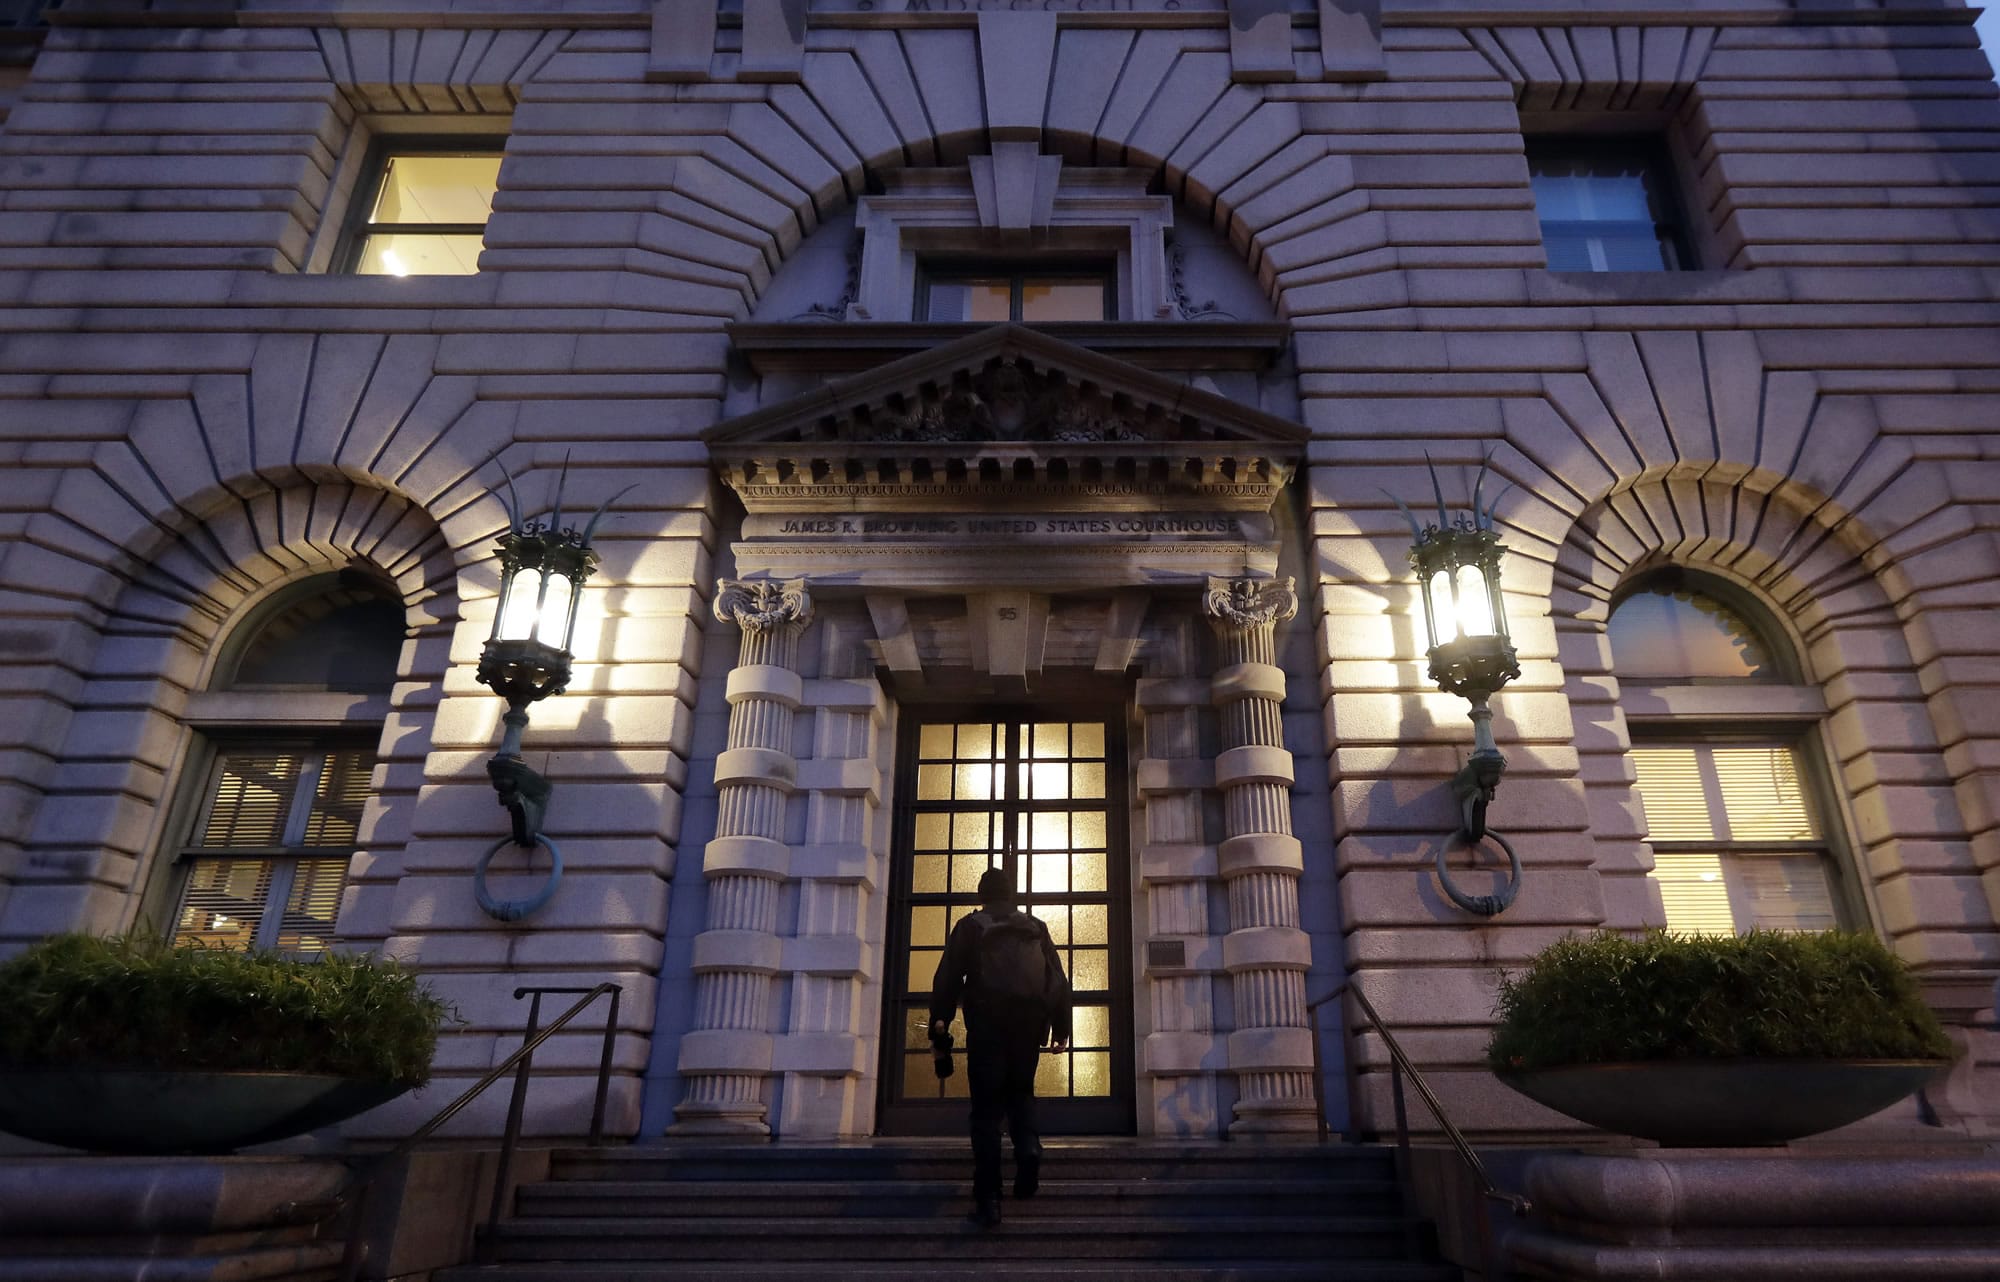 A man walks up the steps of the 9th U.S. Circuit Court of Appeals building Thursday, Feb. 9, 2017, in San Francisco. A federal appeals court refused Thursday to reinstate President Donald Trump's ban on travelers from seven predominantly Muslim nations, dealing another legal setback to the new administration's immigration policy.